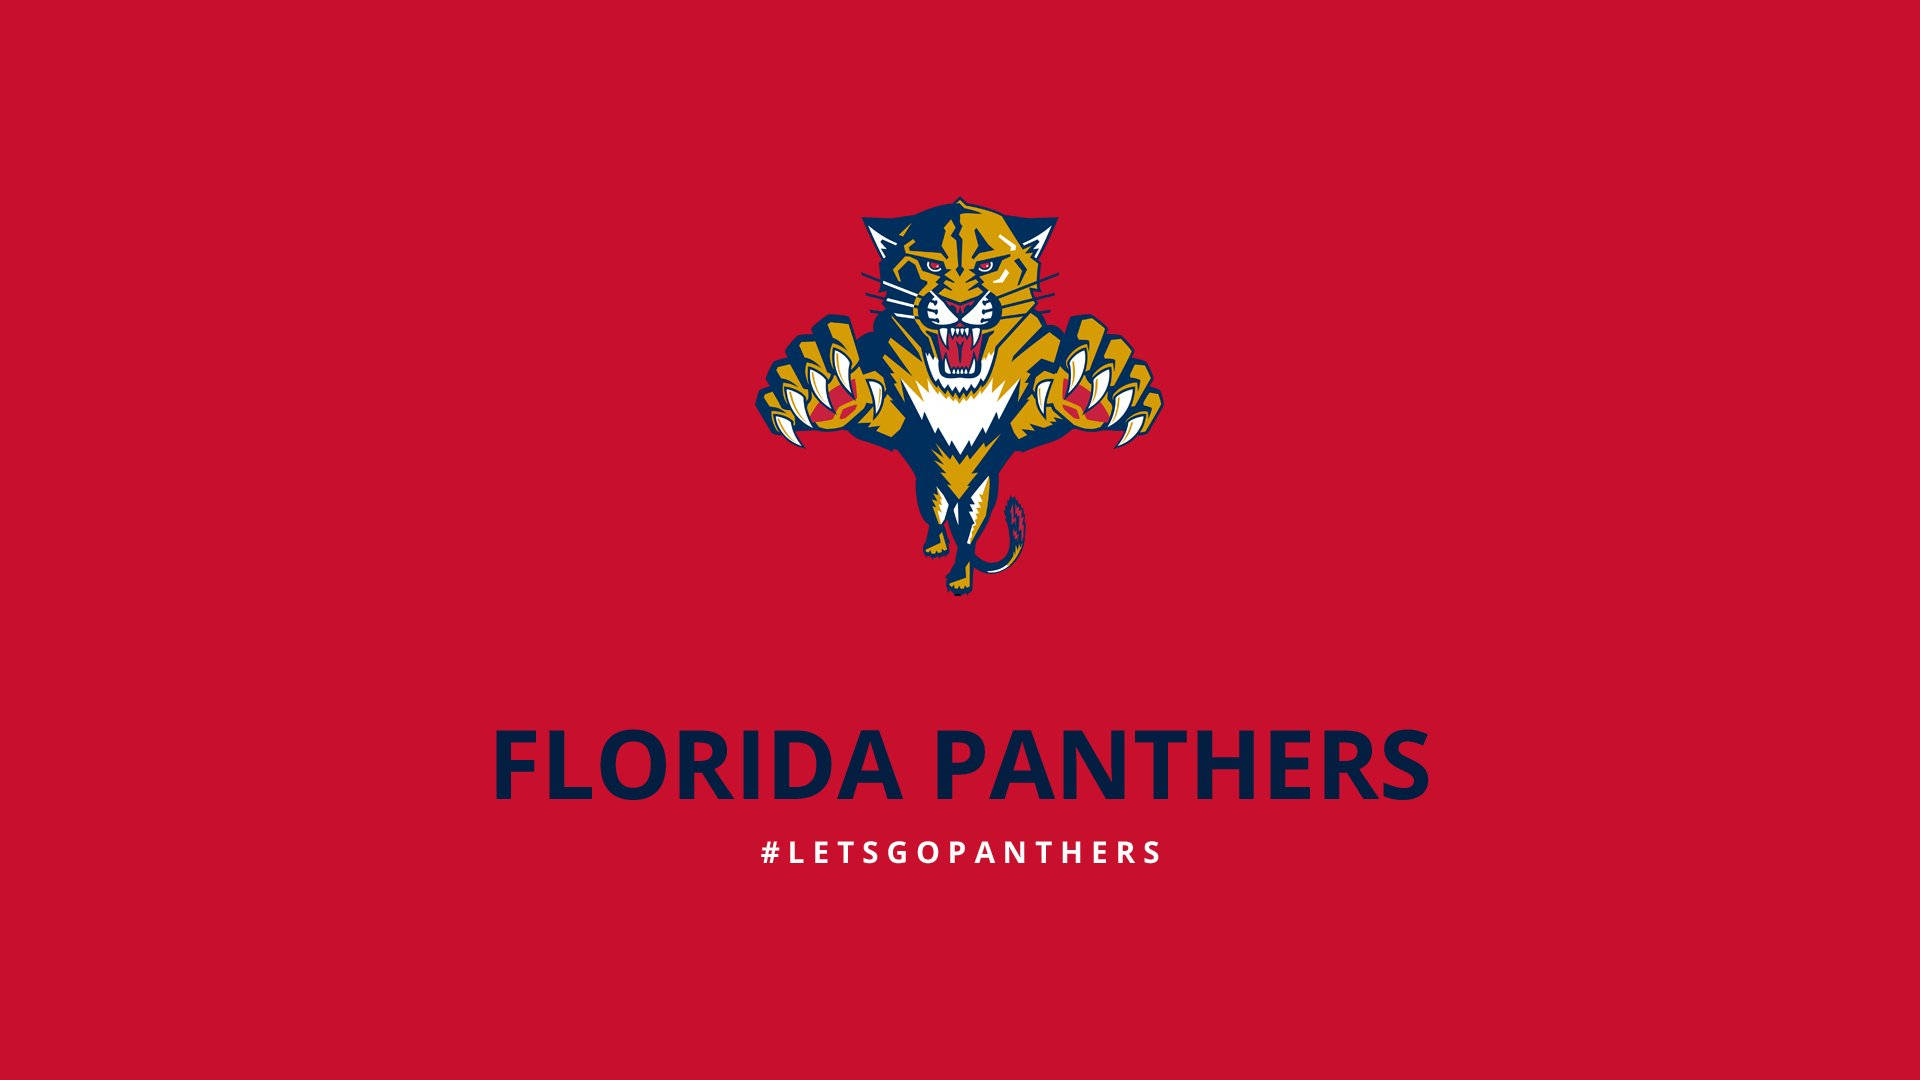 Exciting action moment in a Florida Panthers game Wallpaper